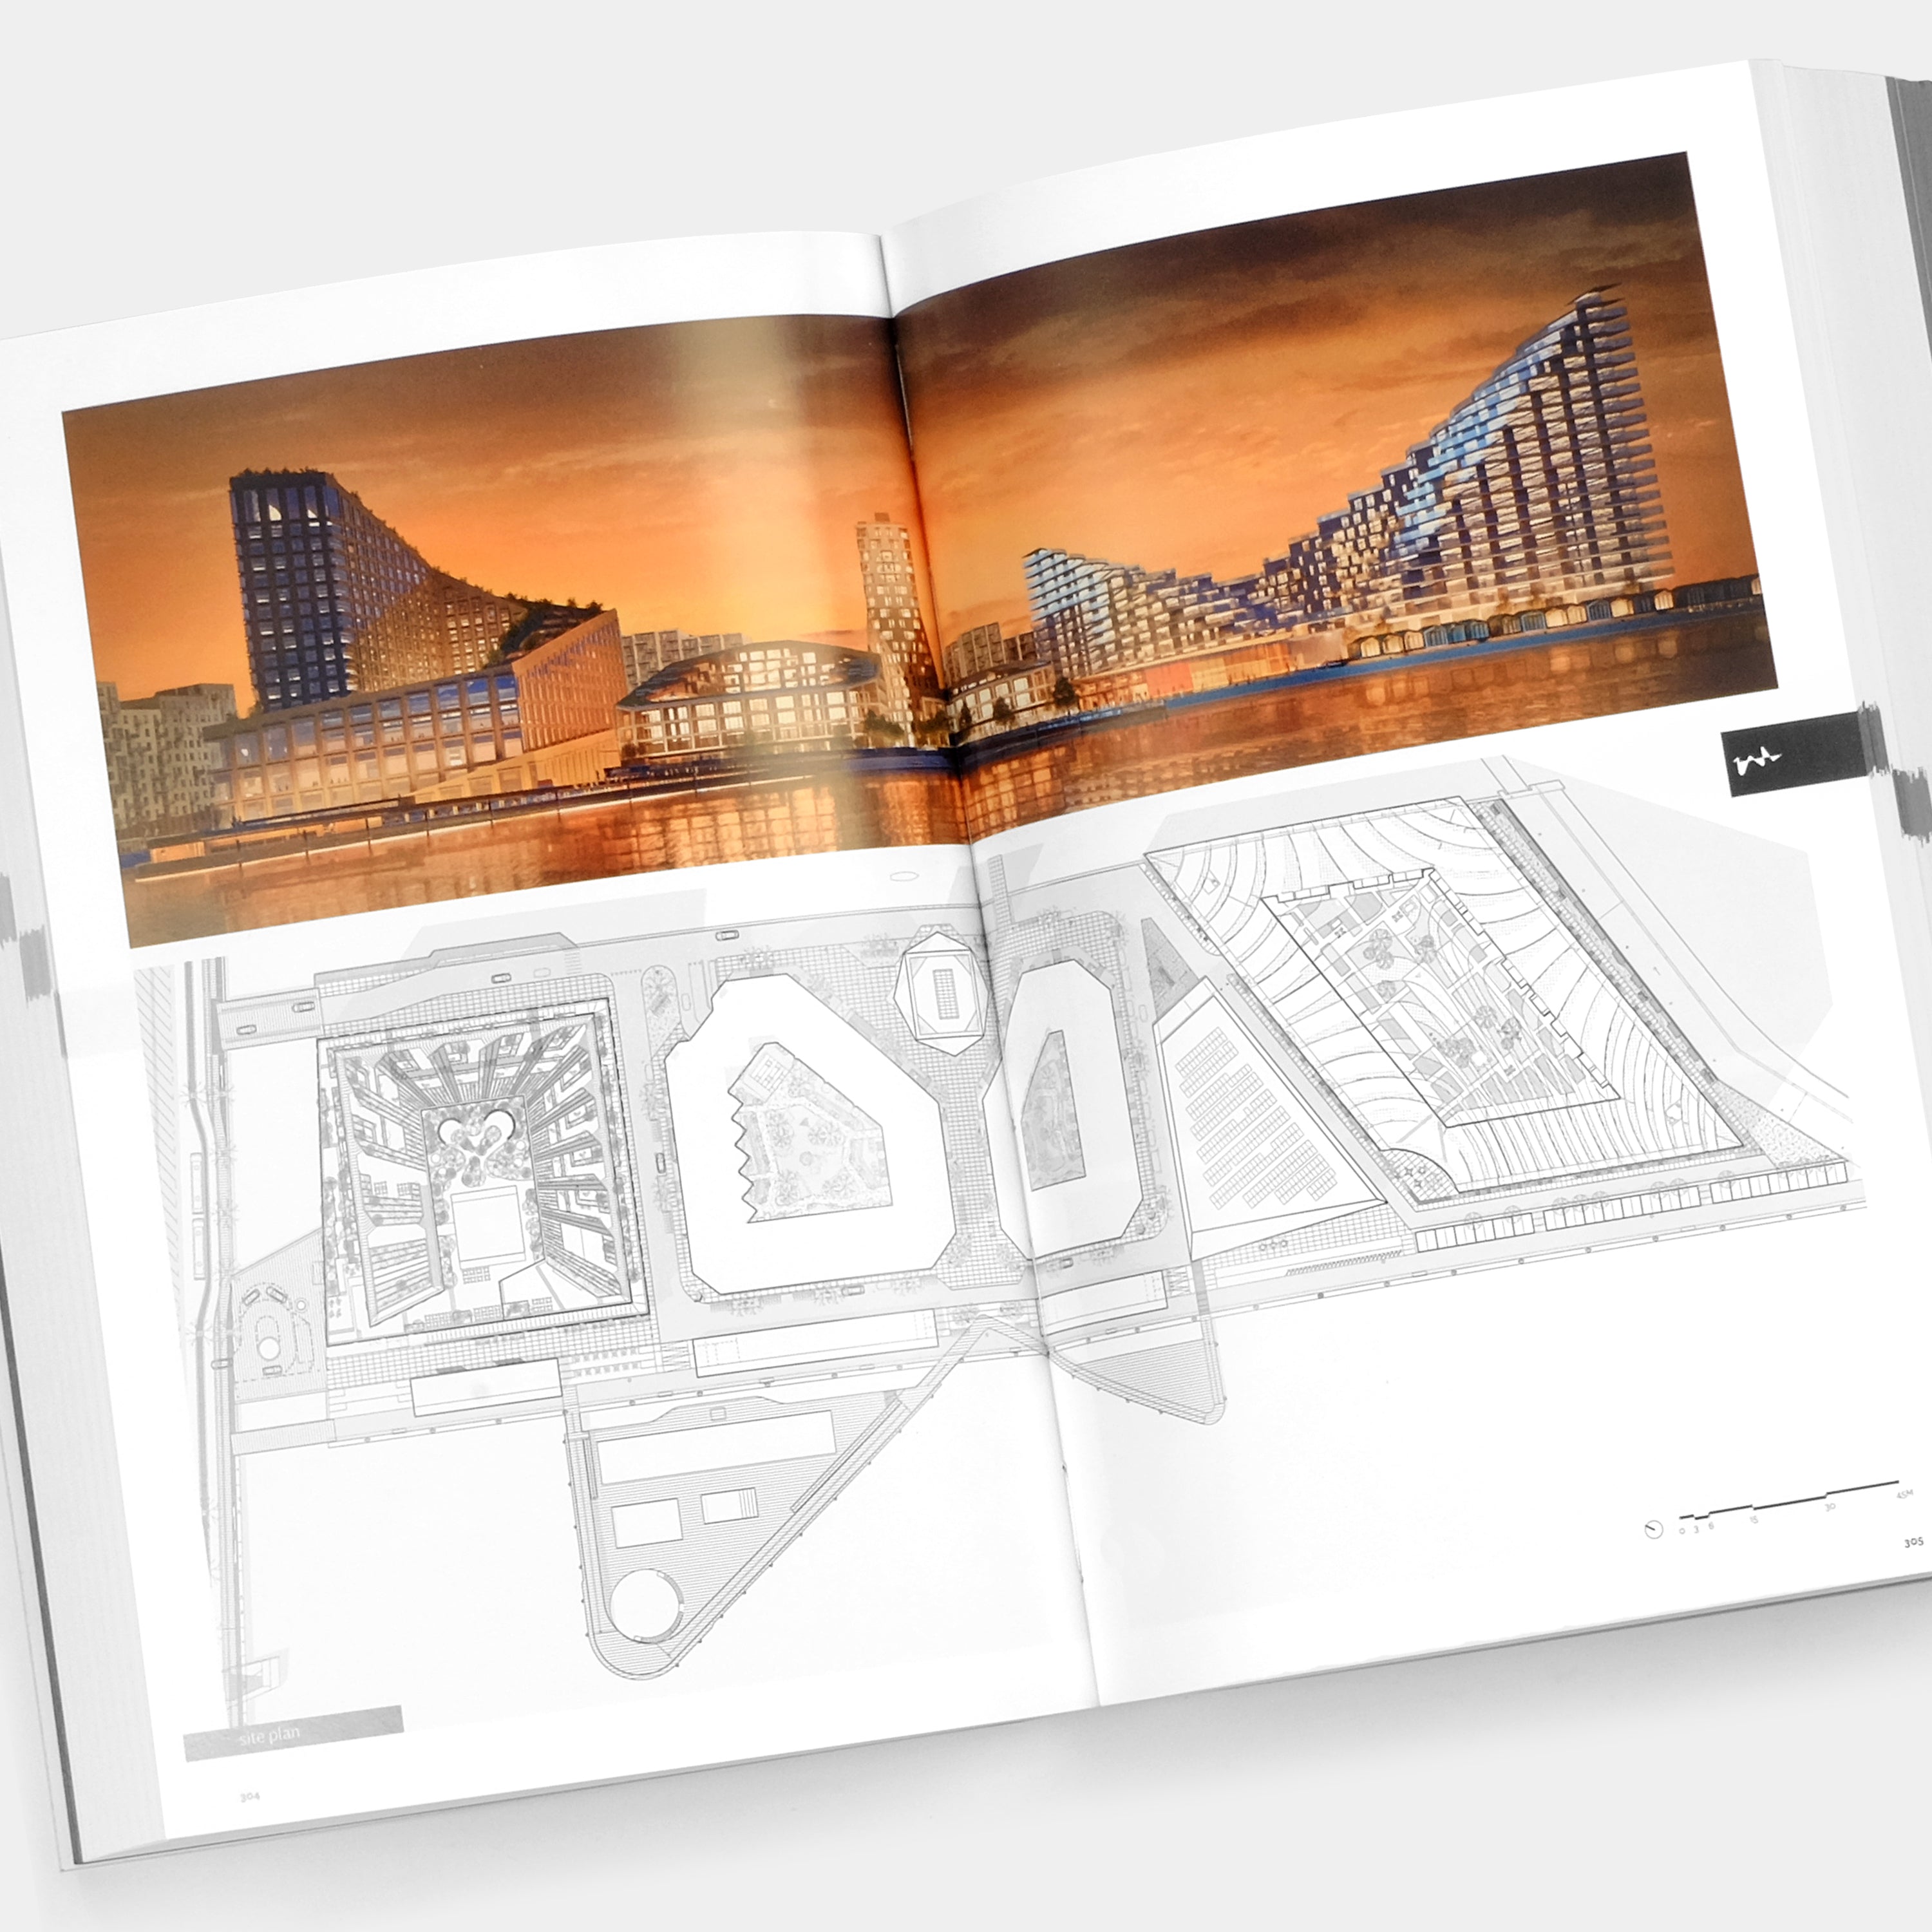 Formgiving: An Architectural Future History by BIG Taschen Book